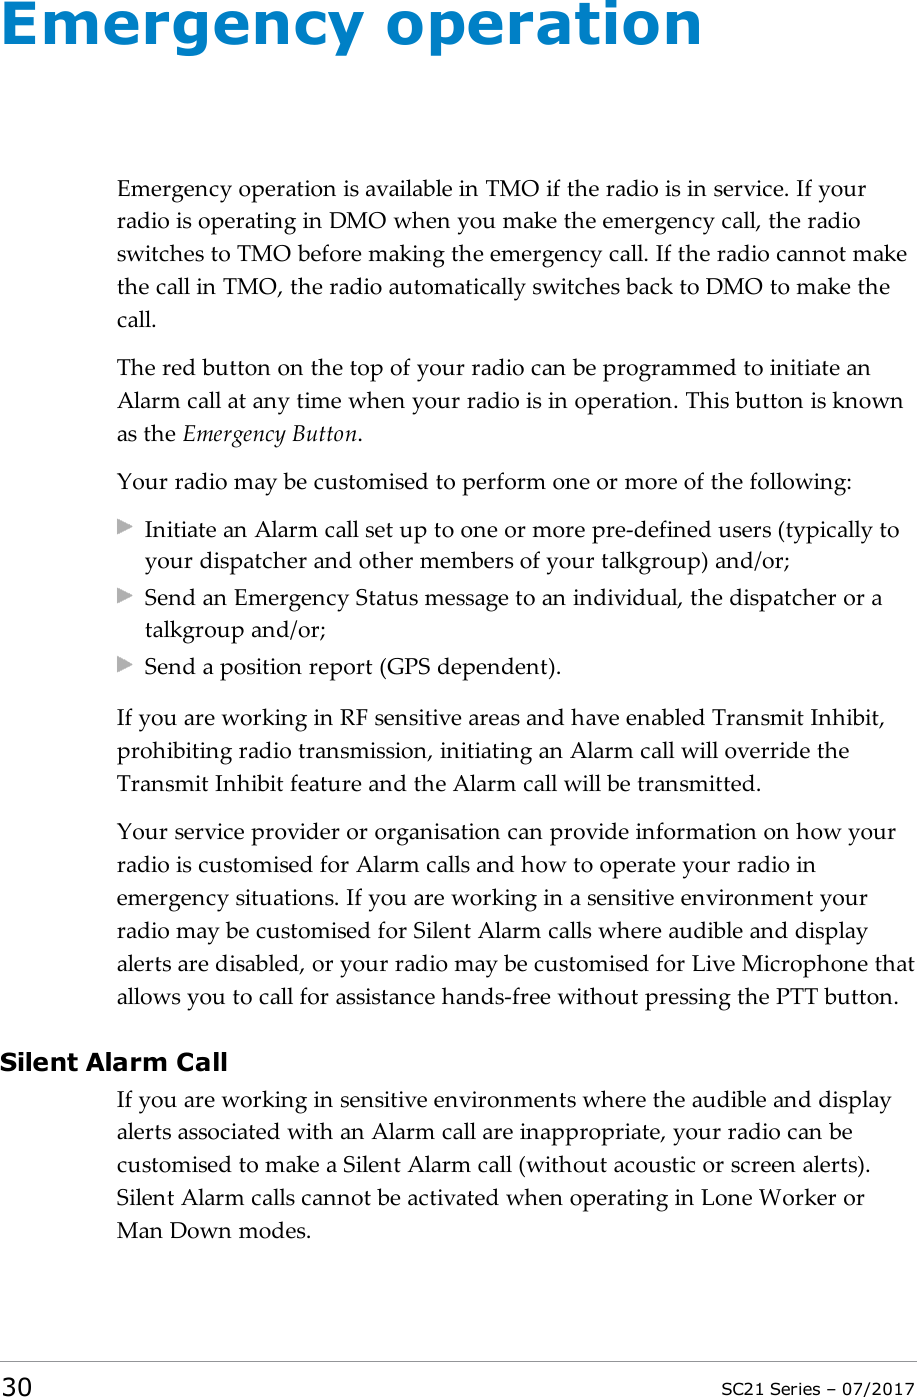 Emergency operationEmergency operation is available in TMO if the radio is in service. If yourradio is operating in DMO when you make the emergency call, the radioswitches to TMO before making the emergency call. If the radio cannot makethe call in TMO, the radio automatically switches back to DMO to make thecall.The red button on the top of your radio can be programmed to initiate anAlarm call at any time when your radio is in operation. This button is knownas the Emergency Button.Your radio may be customised to perform one or more of the following:Initiate an Alarm call set up to one or more pre-defined users (typically toyour dispatcher and other members of your talkgroup) and/or;Send an Emergency Status message to an individual, the dispatcher or atalkgroup and/or;Send a position report (GPS dependent).If you are working in RF sensitive areas and have enabled Transmit Inhibit,prohibiting radio transmission, initiating an Alarm call will override theTransmit Inhibit feature and the Alarm call will be transmitted.Your service provider or organisation can provide information on how yourradio is customised for Alarm calls and how to operate your radio inemergency situations. If you are working in a sensitive environment yourradio may be customised for Silent Alarm calls where audible and displayalerts are disabled, or your radio may be customised for Live Microphone thatallows you to call for assistance hands-free without pressing the PTT button.Silent Alarm CallIf you are working in sensitive environments where the audible and displayalerts associated with an Alarm call are inappropriate, your radio can becustomised to make a Silent Alarm call (without acoustic or screen alerts).Silent Alarm calls cannot be activated when operating in Lone Worker orMan Down modes.30 SC21 Series – 07/2017